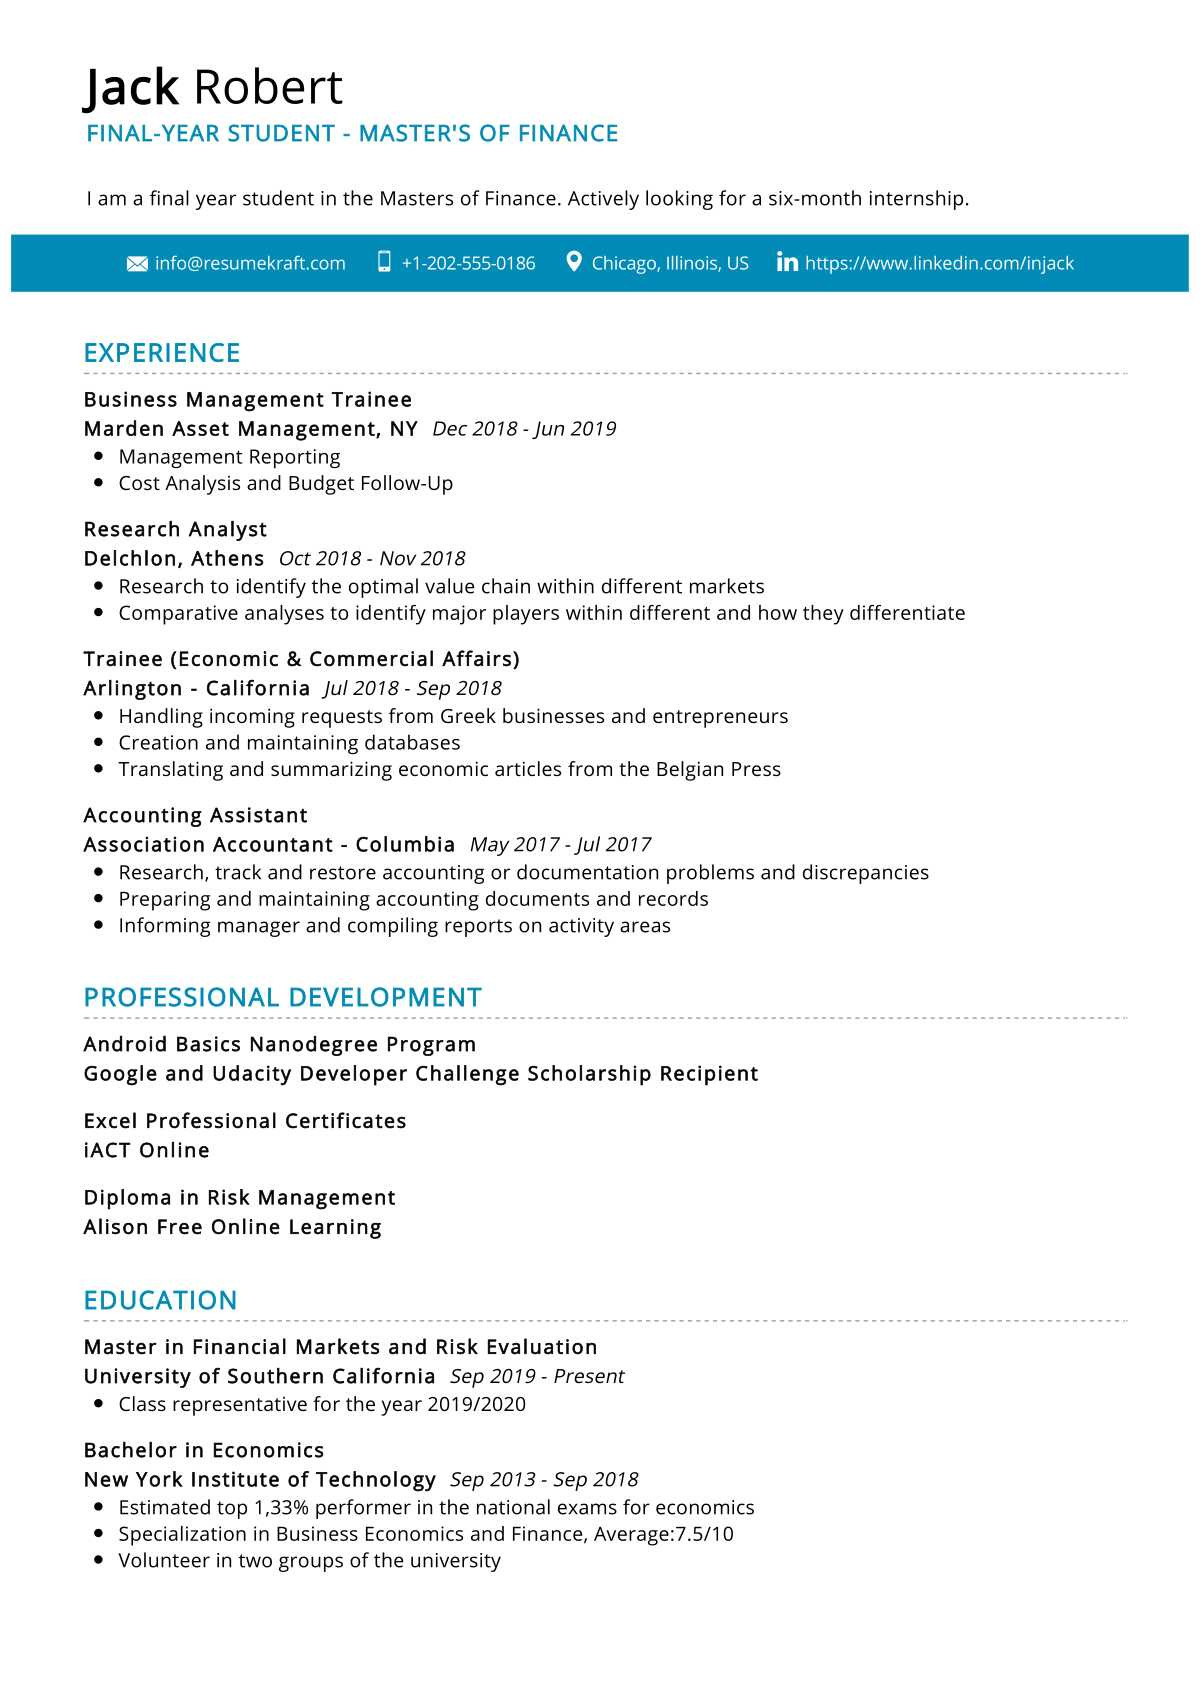 Professinal Resume Sample for Students Still In College Final-year Student Resume Example 2022 Writing Tips – Resumekraft